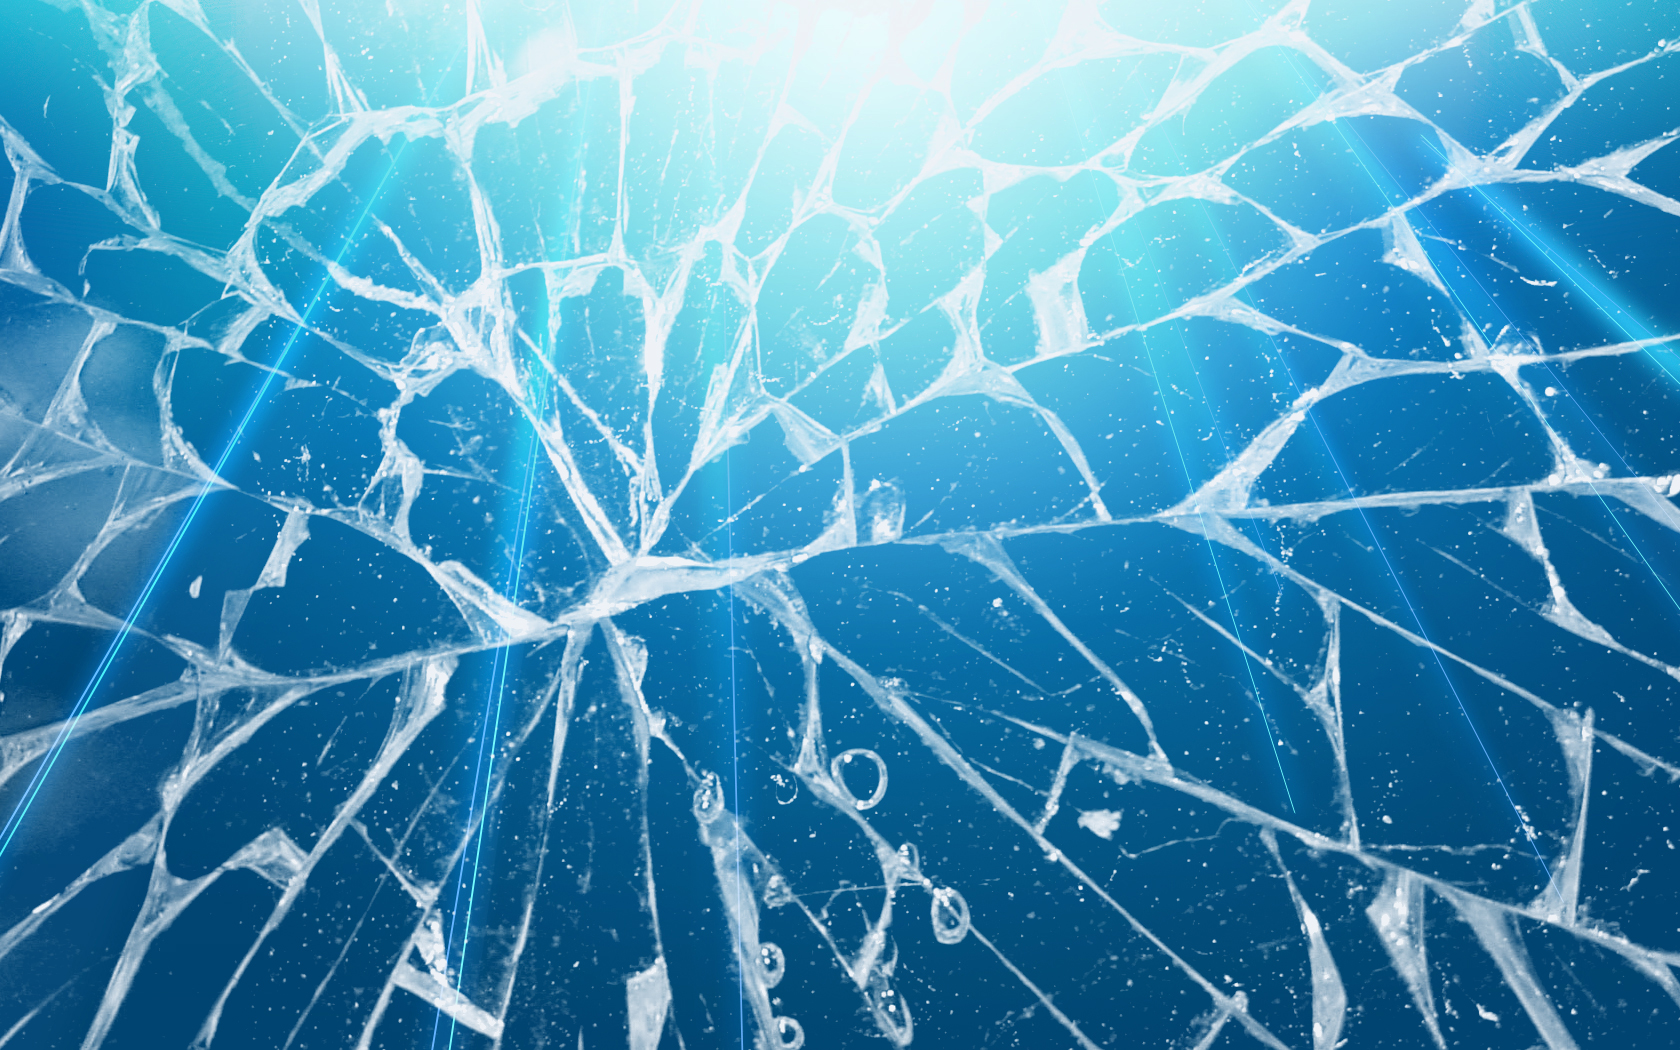 45 Realistic Cracked and Broken Screen Wallpapers